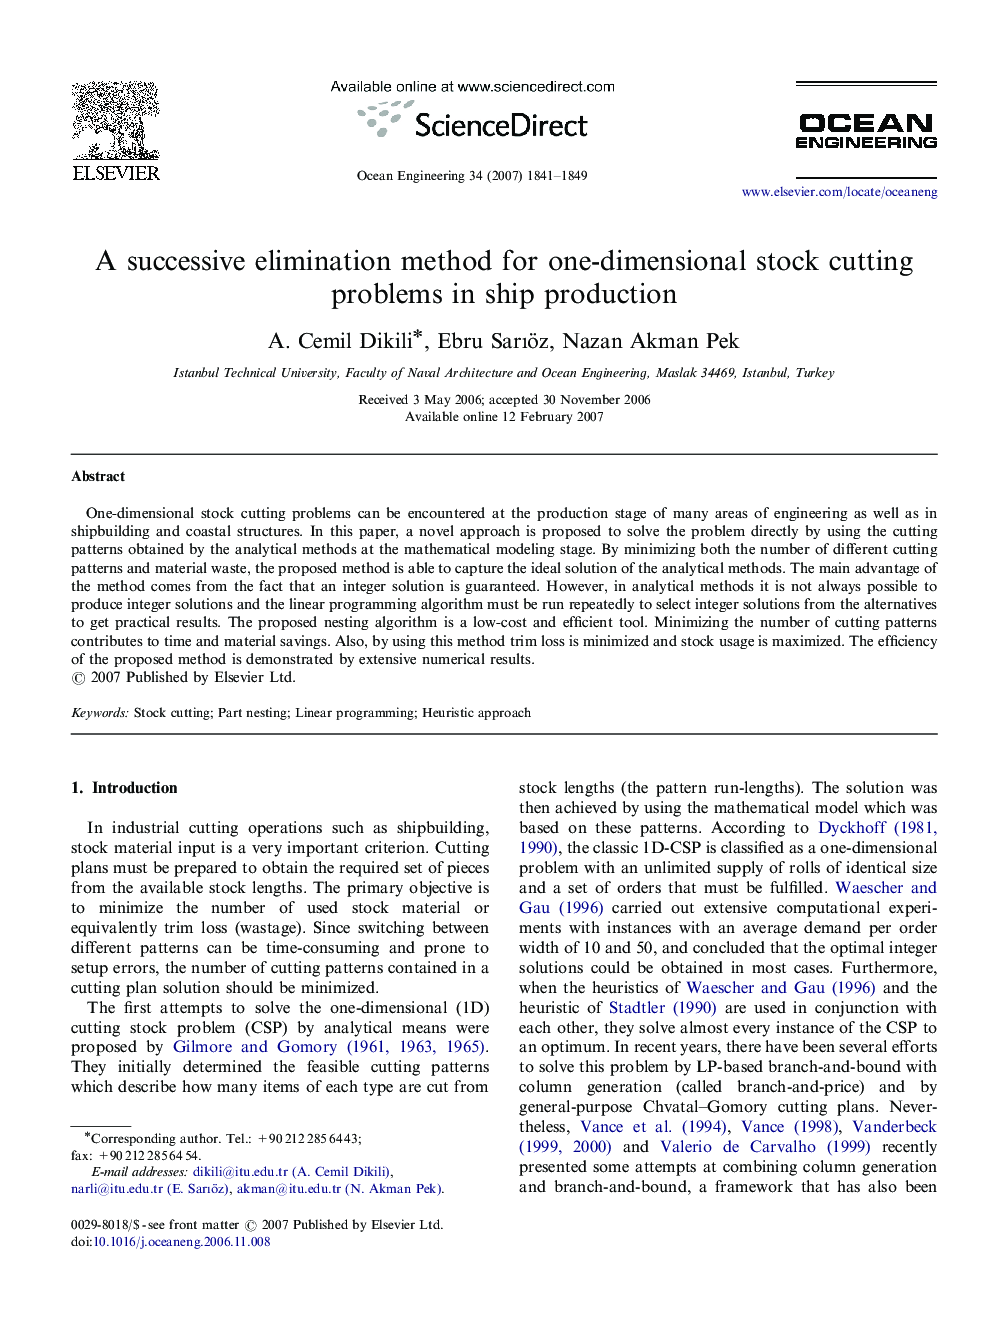 A successive elimination method for one-dimensional stock cutting problems in ship production